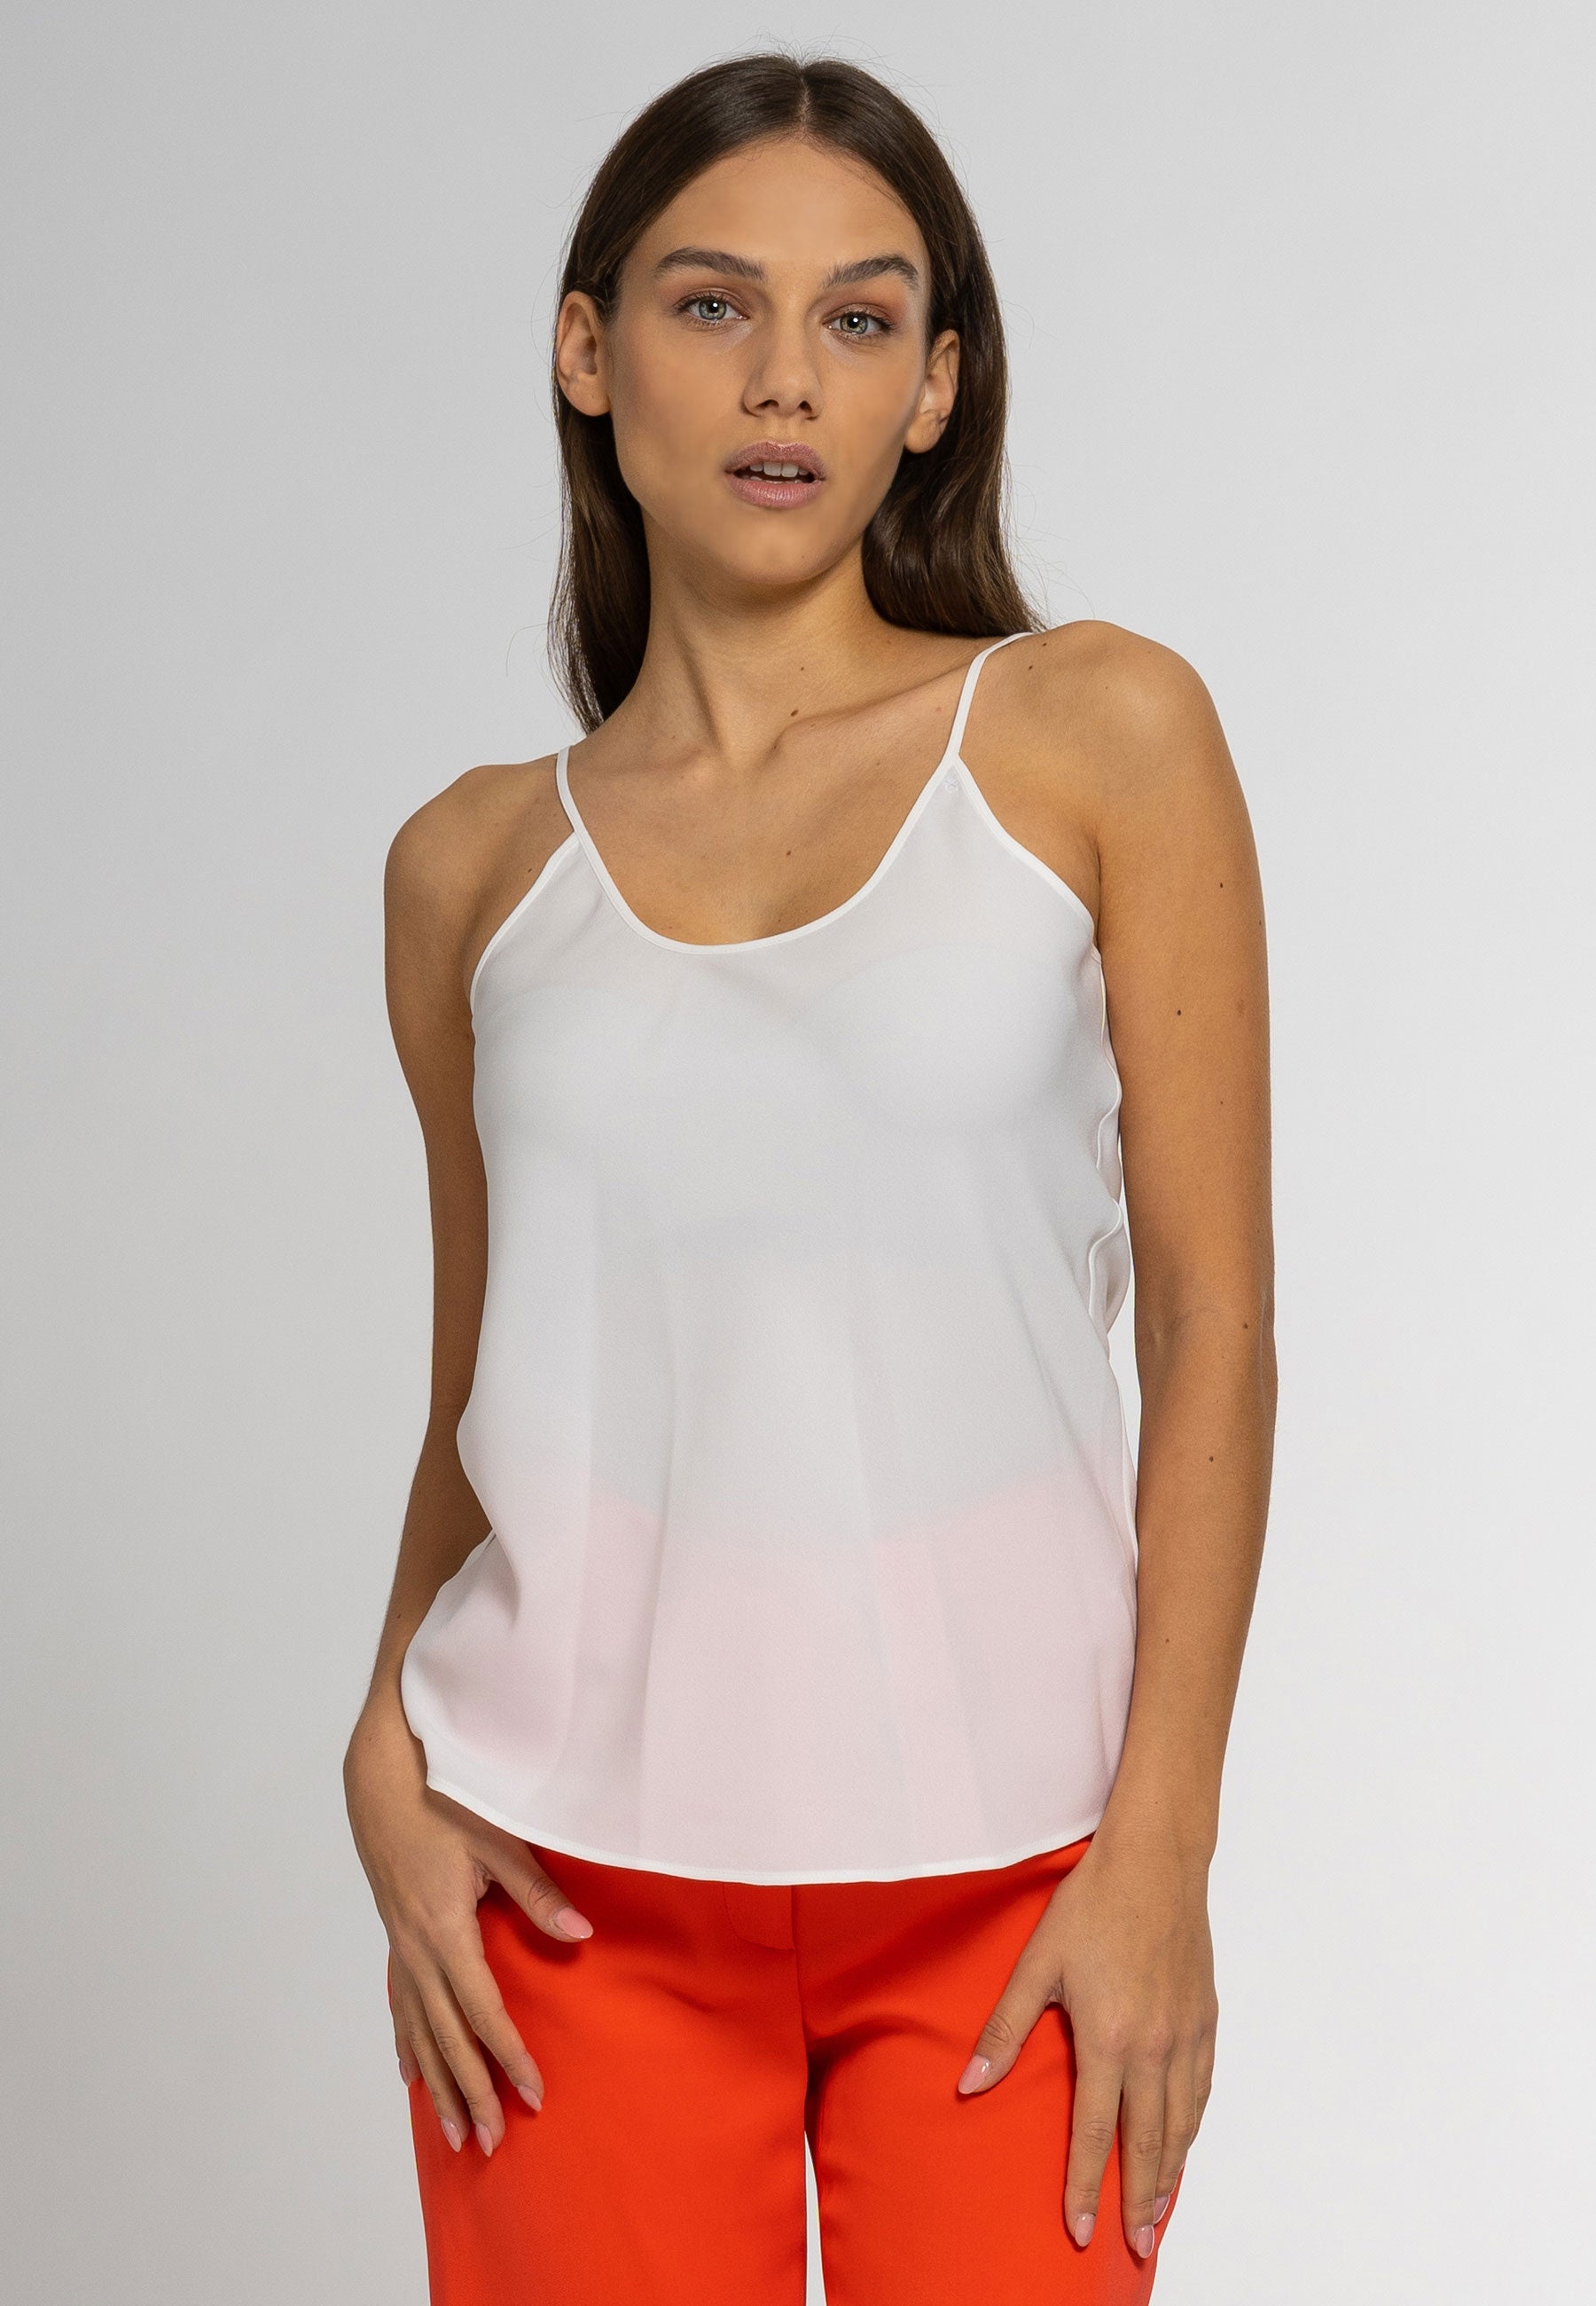 pure silk camisole, camisole in white, light weight fabric, sheer surface quality, chic silk camisole, silk camisole top, silk camisole blouse, silk cami top, camisoles for women, blouse for women, fine knitwear ideas; silk top Silk Camisole; sleeveless top; white silk top